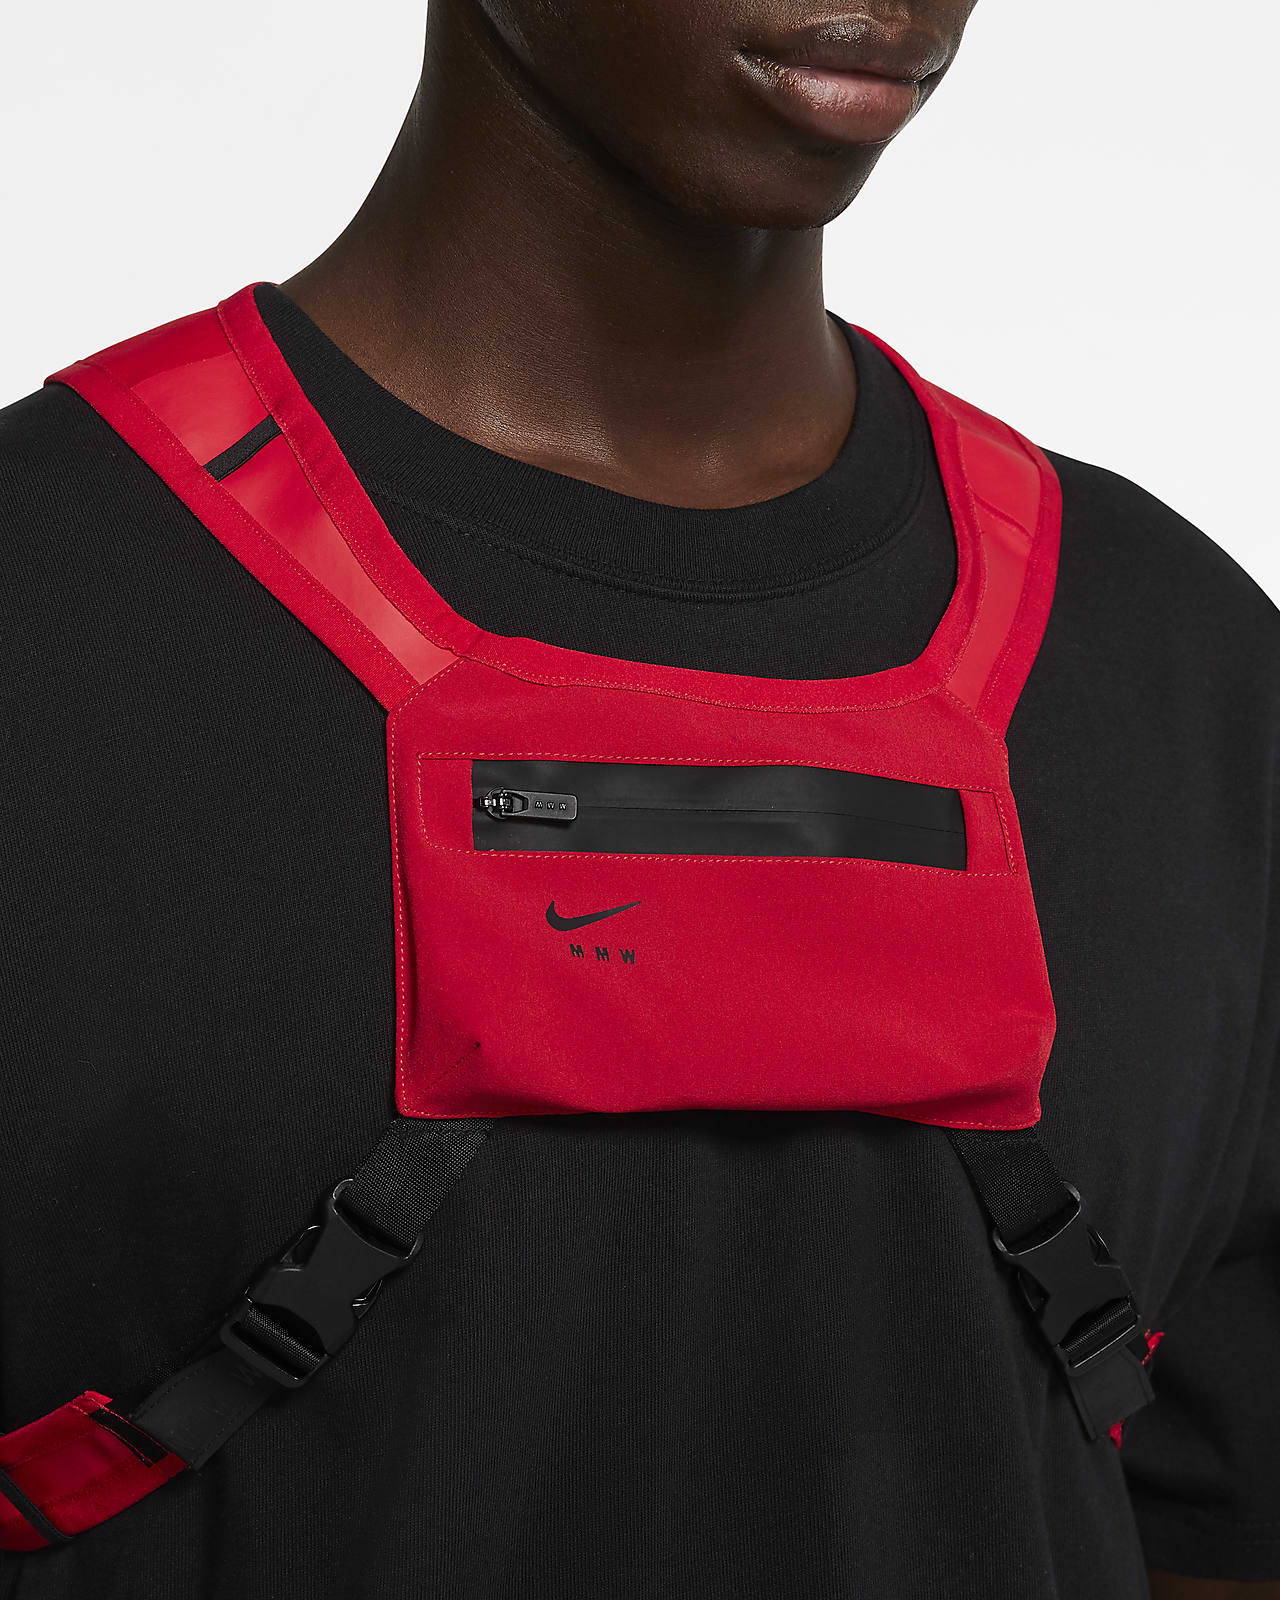 nike chest rig